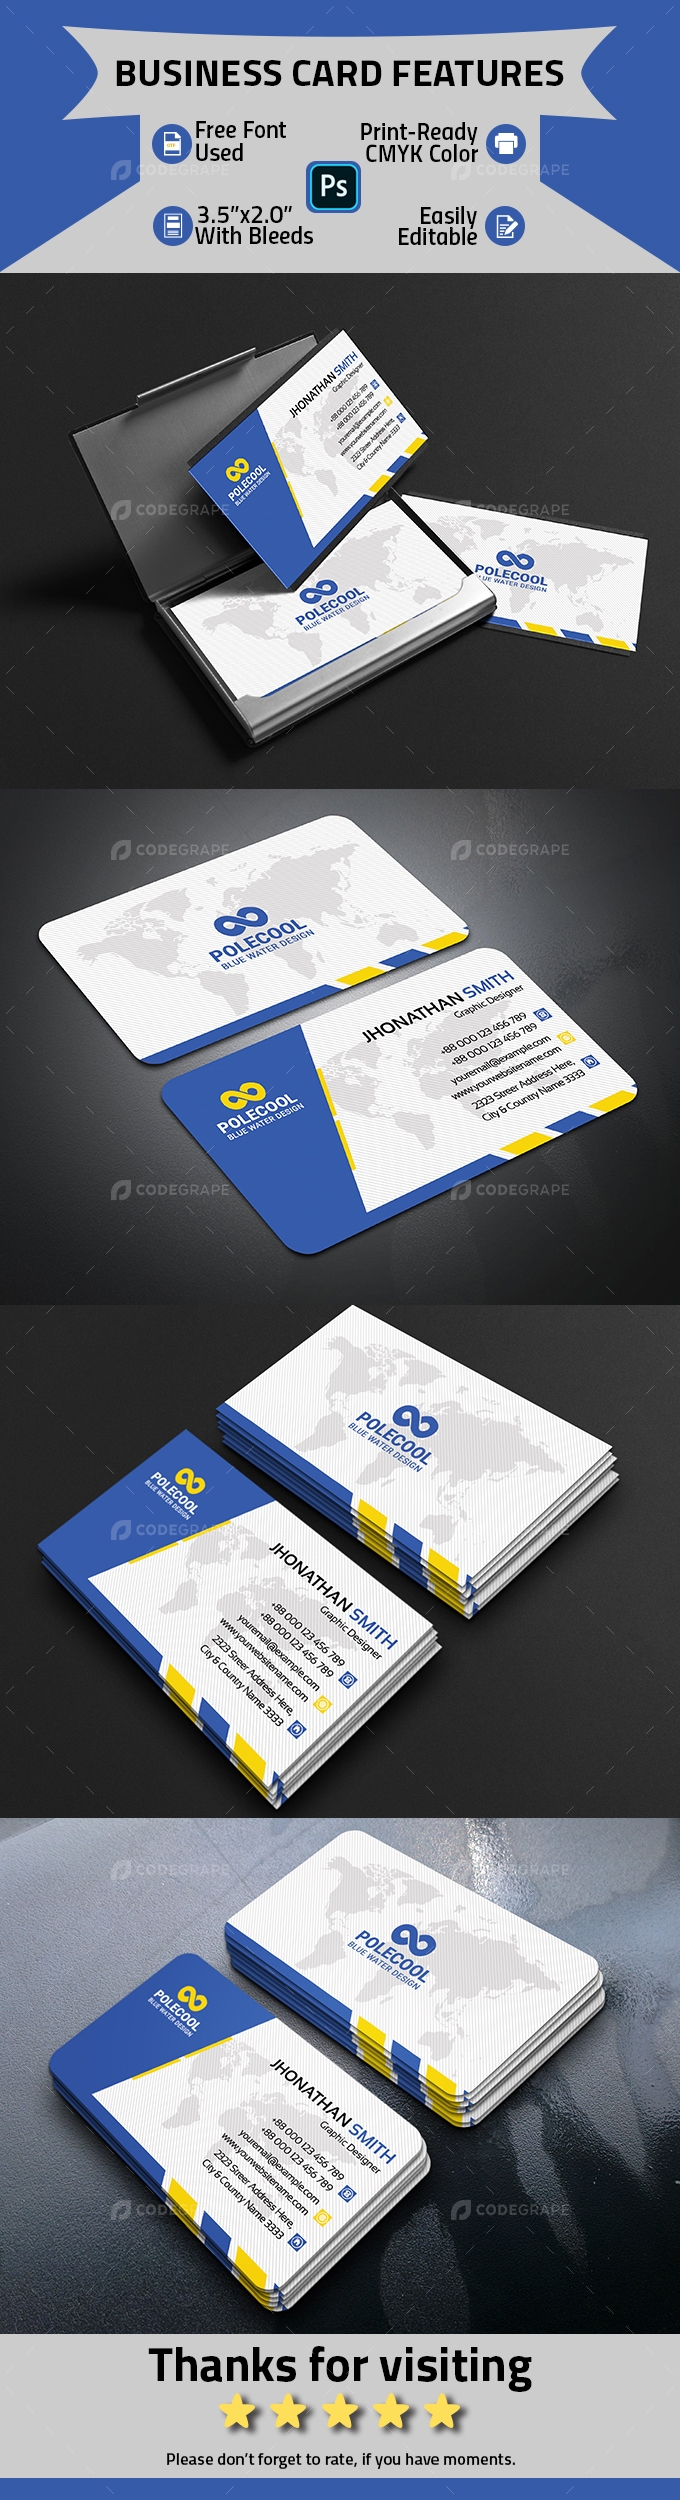 Realstate Business Card